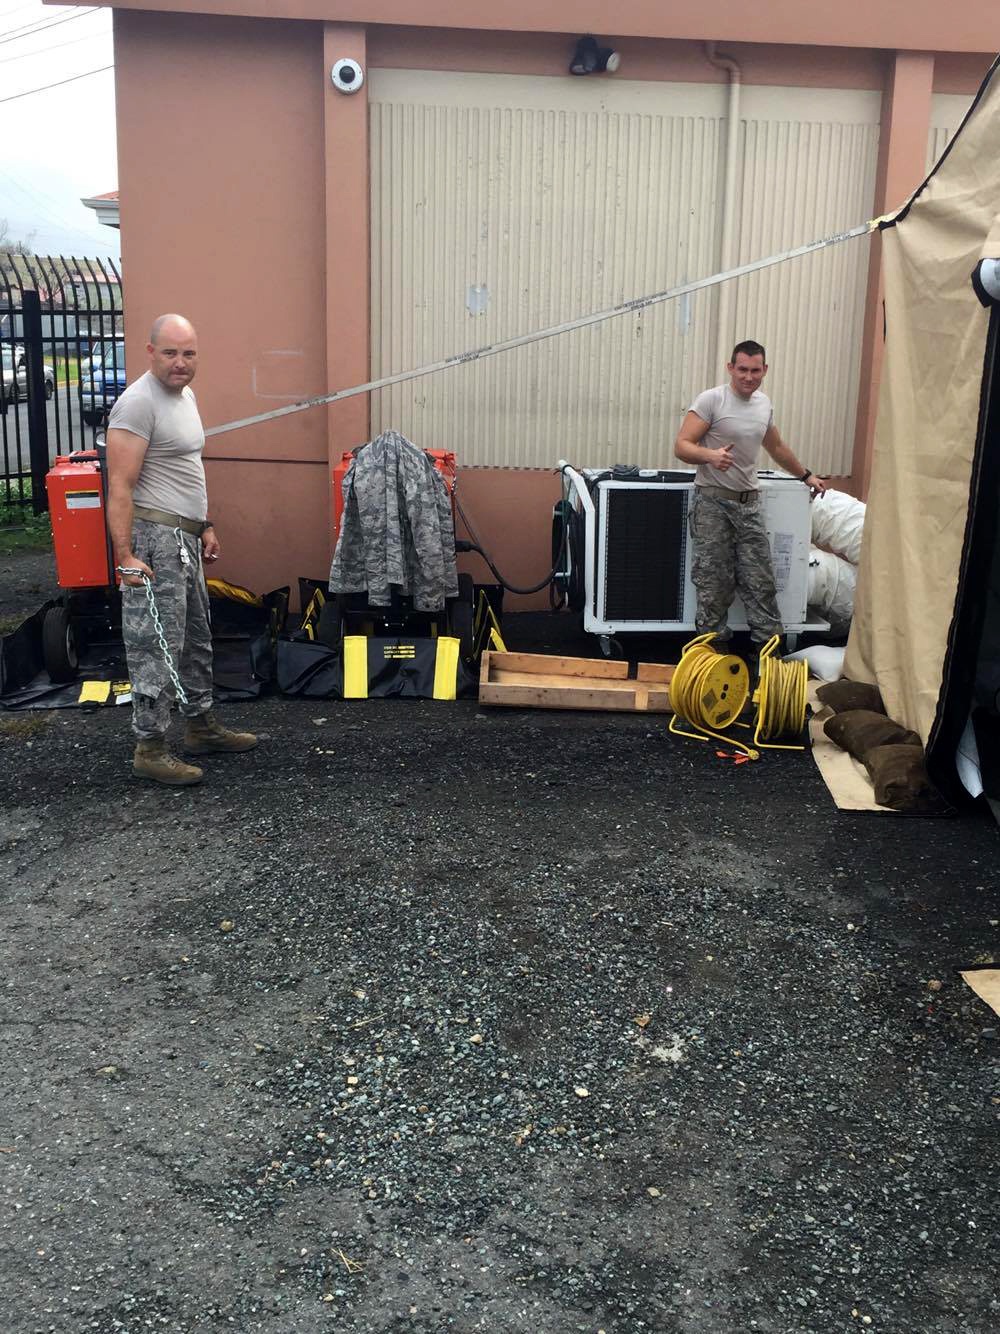 Tech.Sgt. Jason Clarkson and Master Sgt. Nathan Lukey, part of a six-member team from the 269th Combat Communications Squadron, Spriingfield, Ohio Air National Guard base,  prepares power and hvac for equipment to support first responders in the aftermath